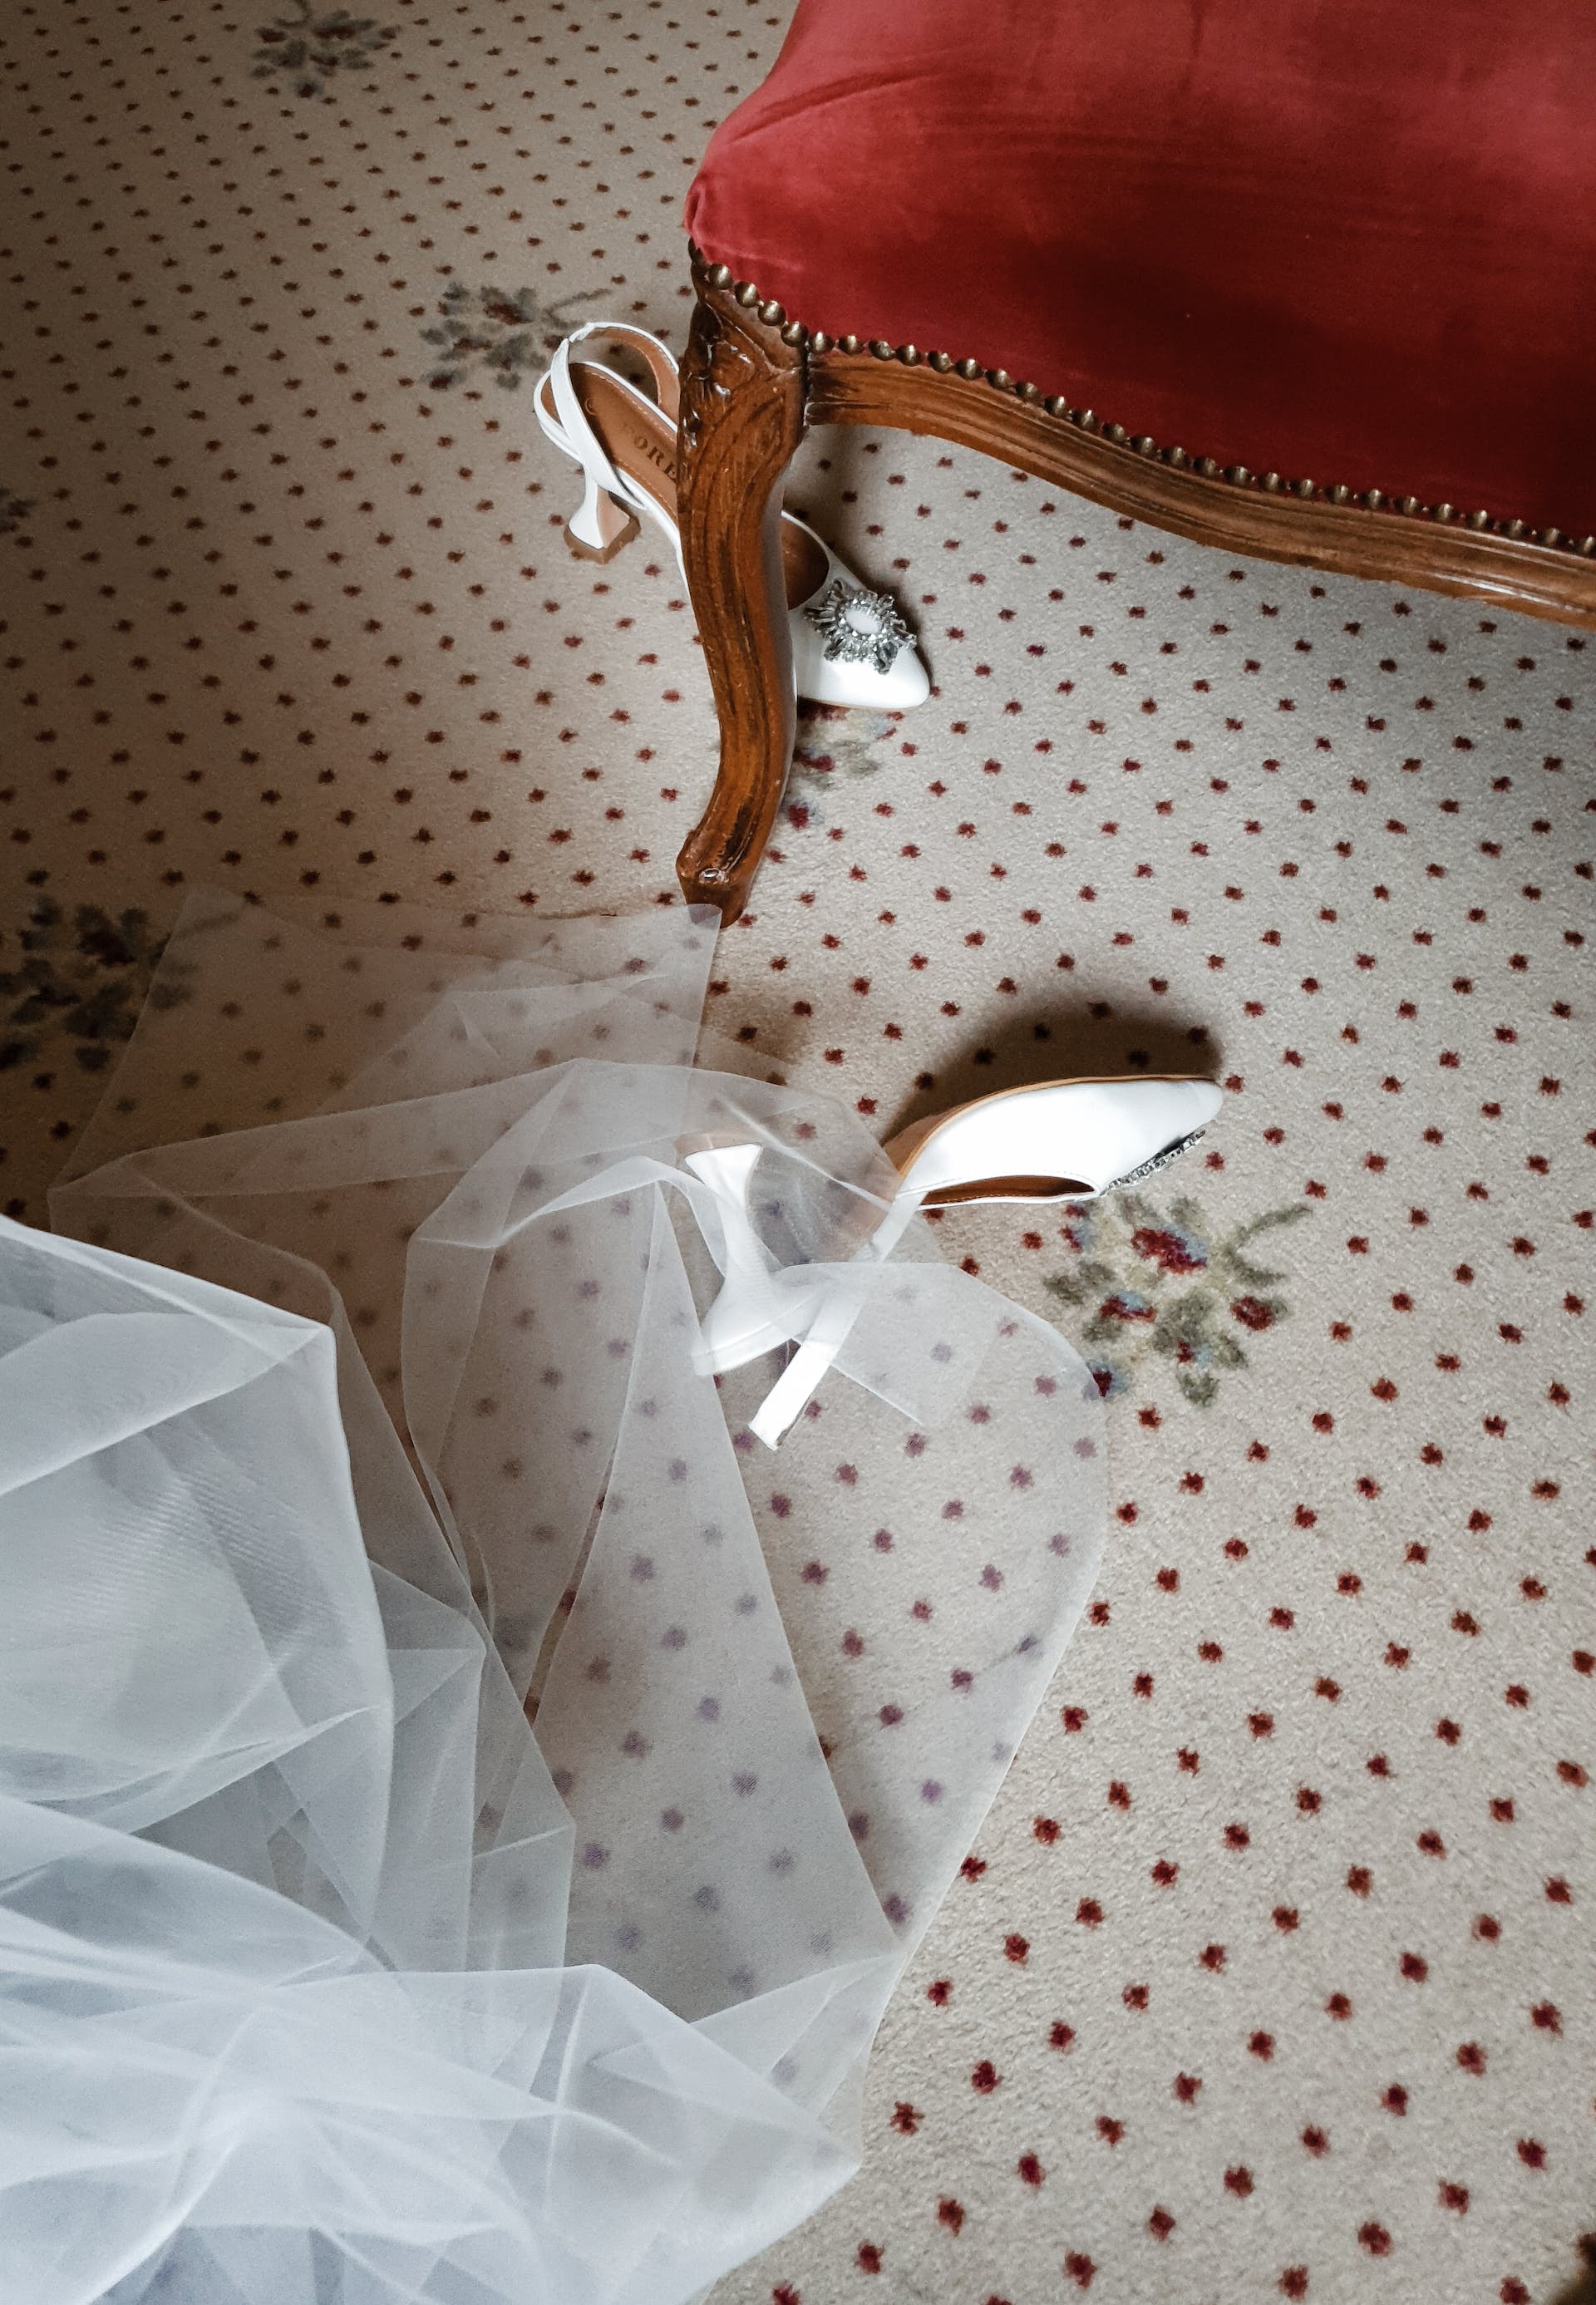 Wedding dress and shoes on floor | Source: Pexels